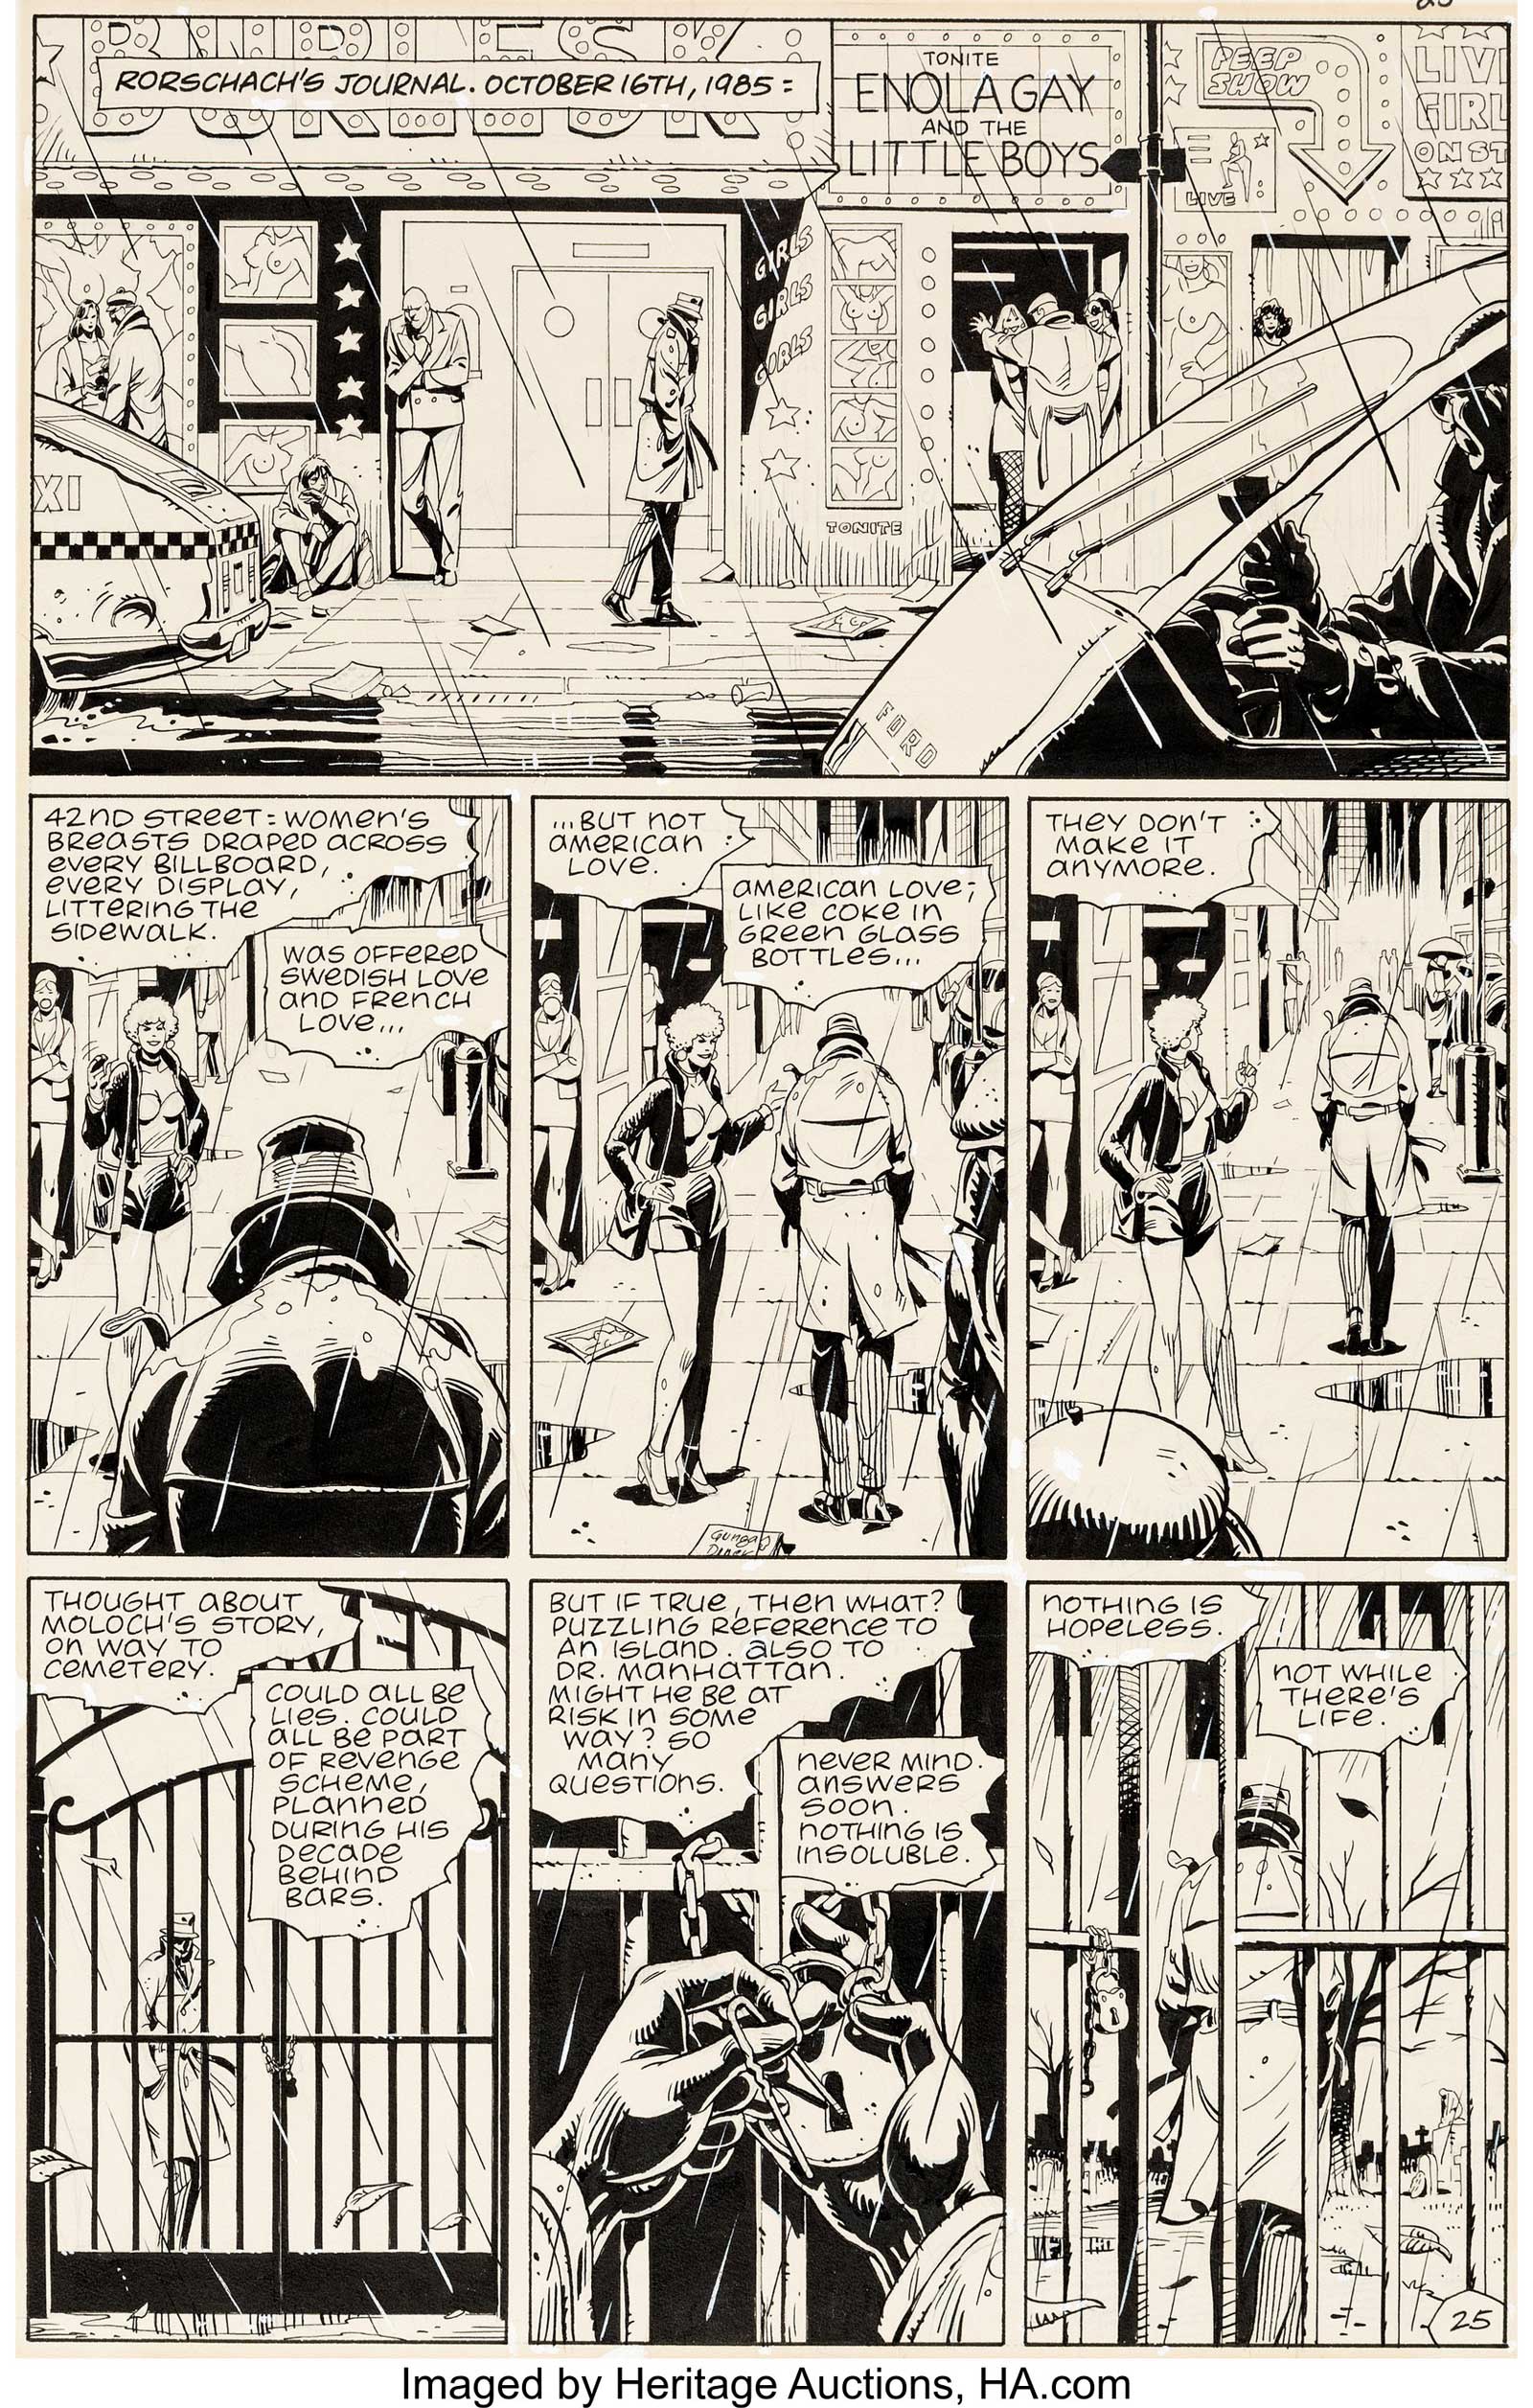 Watchmen #2 Page 25 by Dave Gibbons